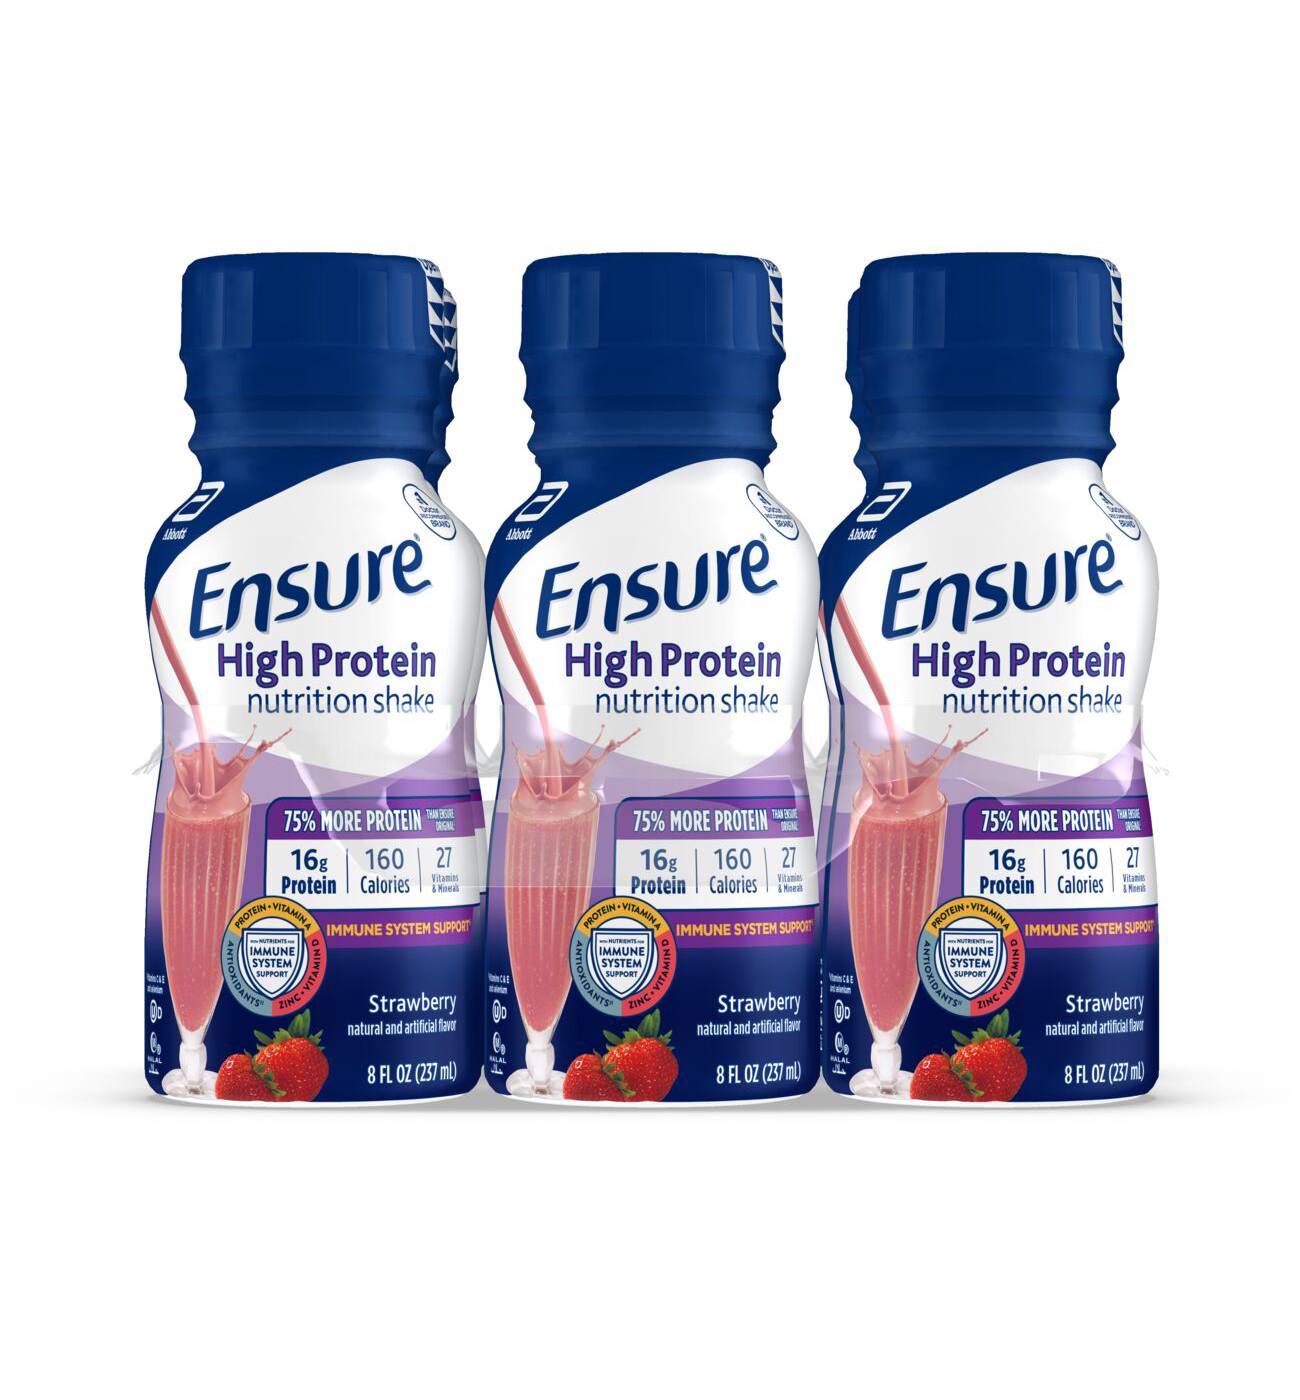 Ensure High Protein Nutrition Shake - Strawberry, 6 pk; image 1 of 2